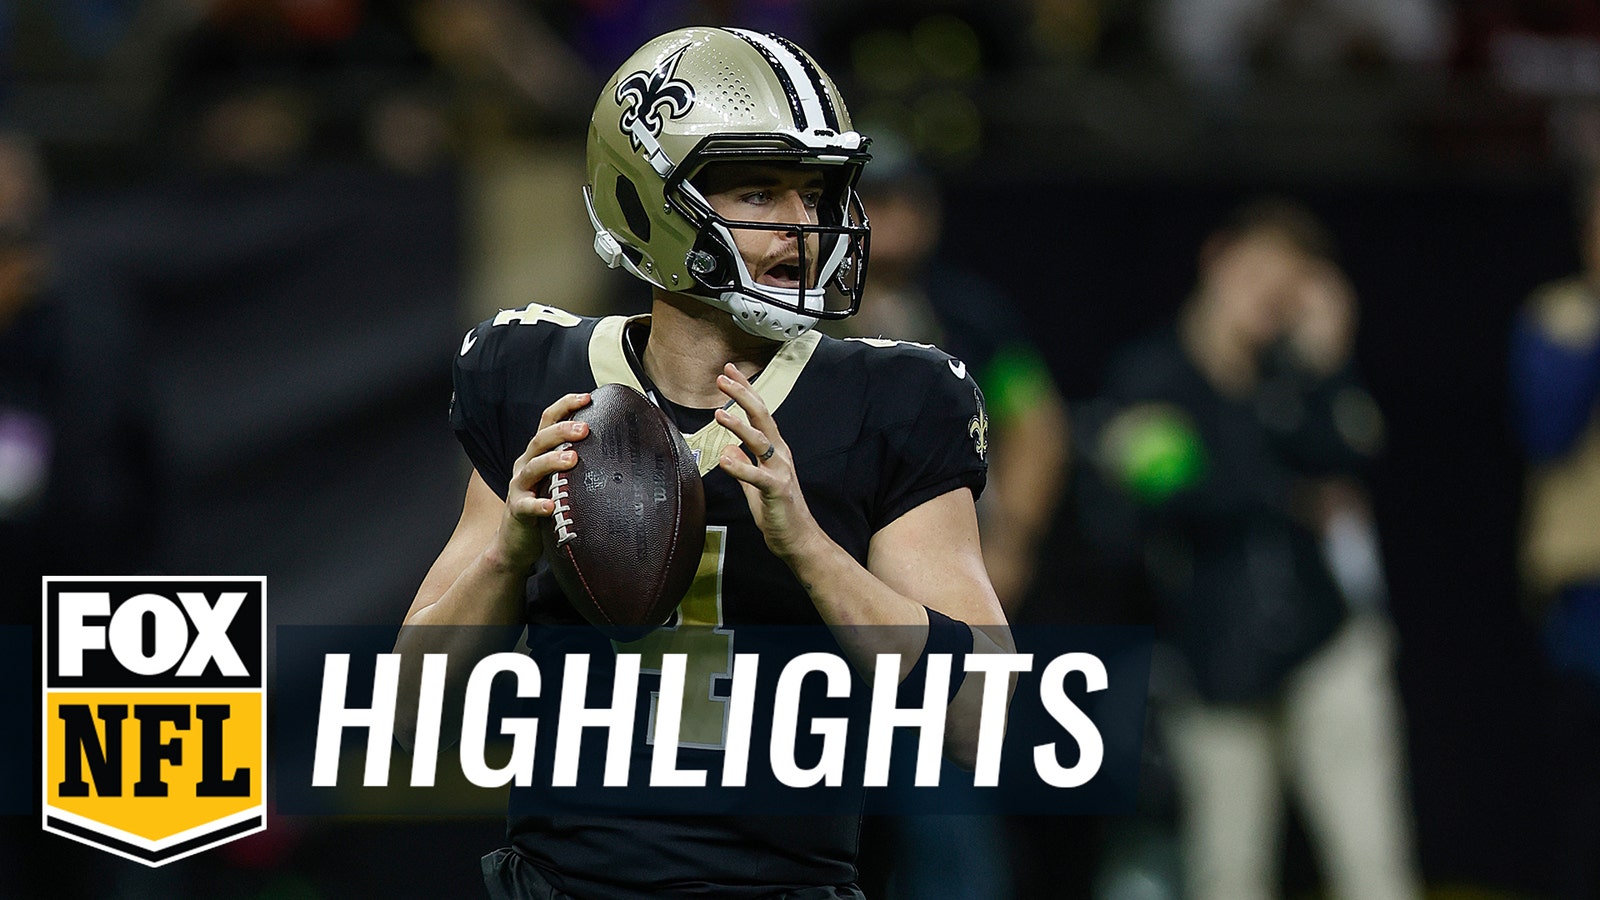 Derek Carr throws for three TDs to help Saints defeat Giants 24-6